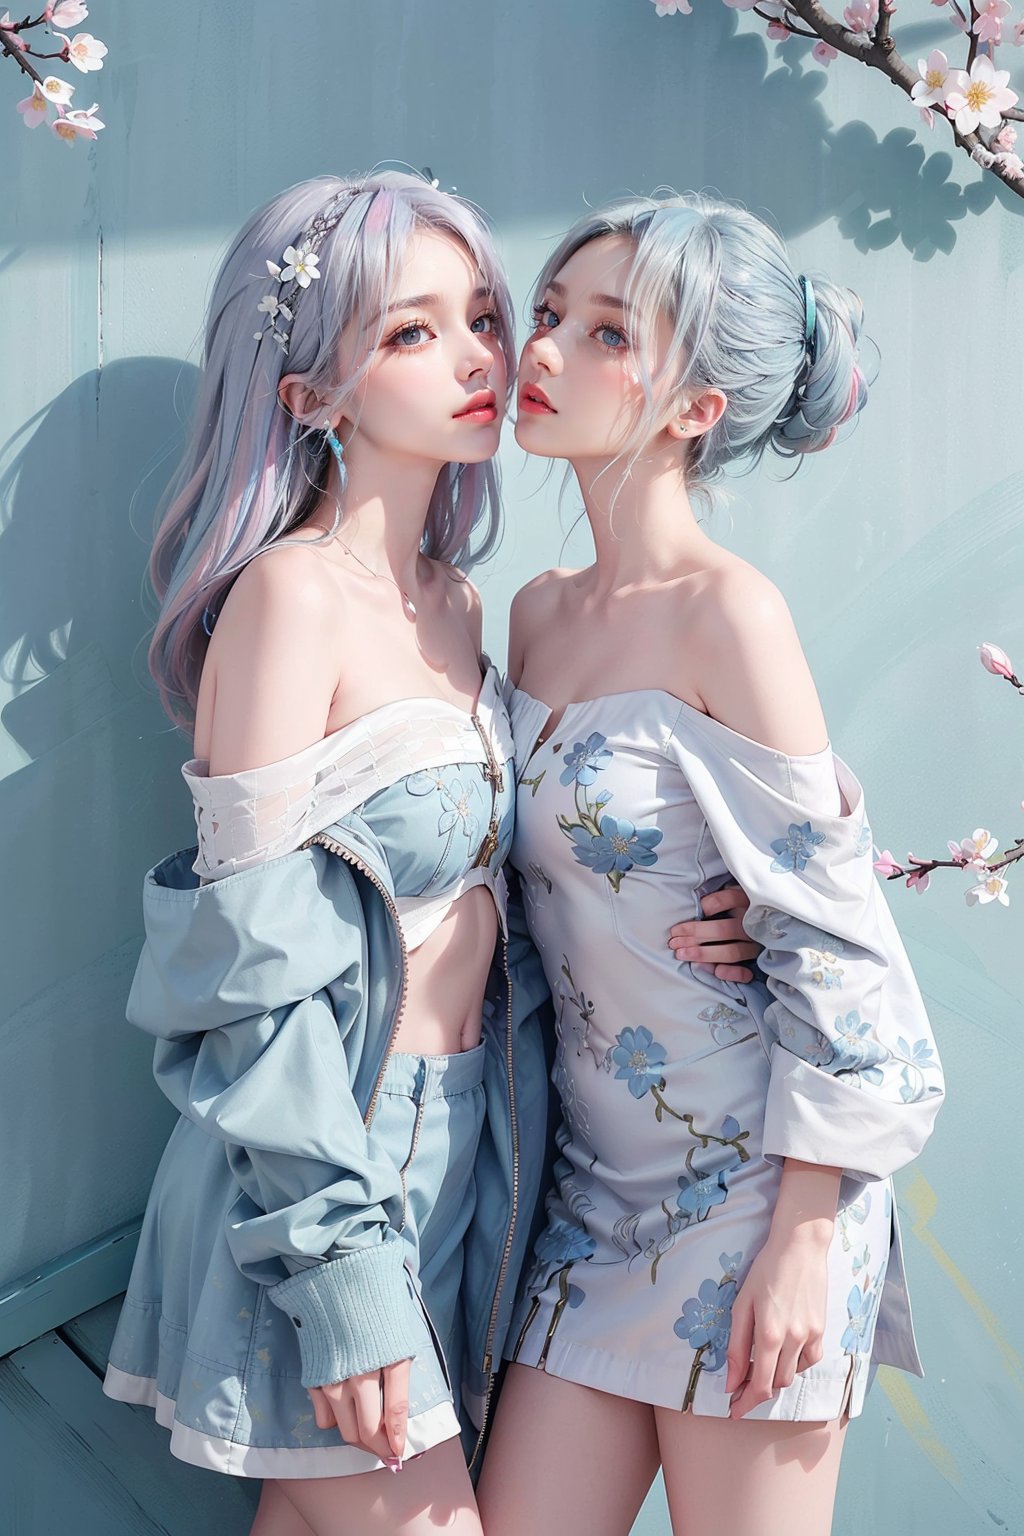 2girls, blush, blue eye, (white and blue highlight hair: 1.4), Donatella Versace designed: ((Luxurious off shoulder blue jacket)) and ((Luxurious green frock)), stylish clothing, messy_hair, (( cherry blossoms art wall background)), kissing expression in their face, (stylish posing), navel,medium full shot,two_girl,2girls,different_clothes